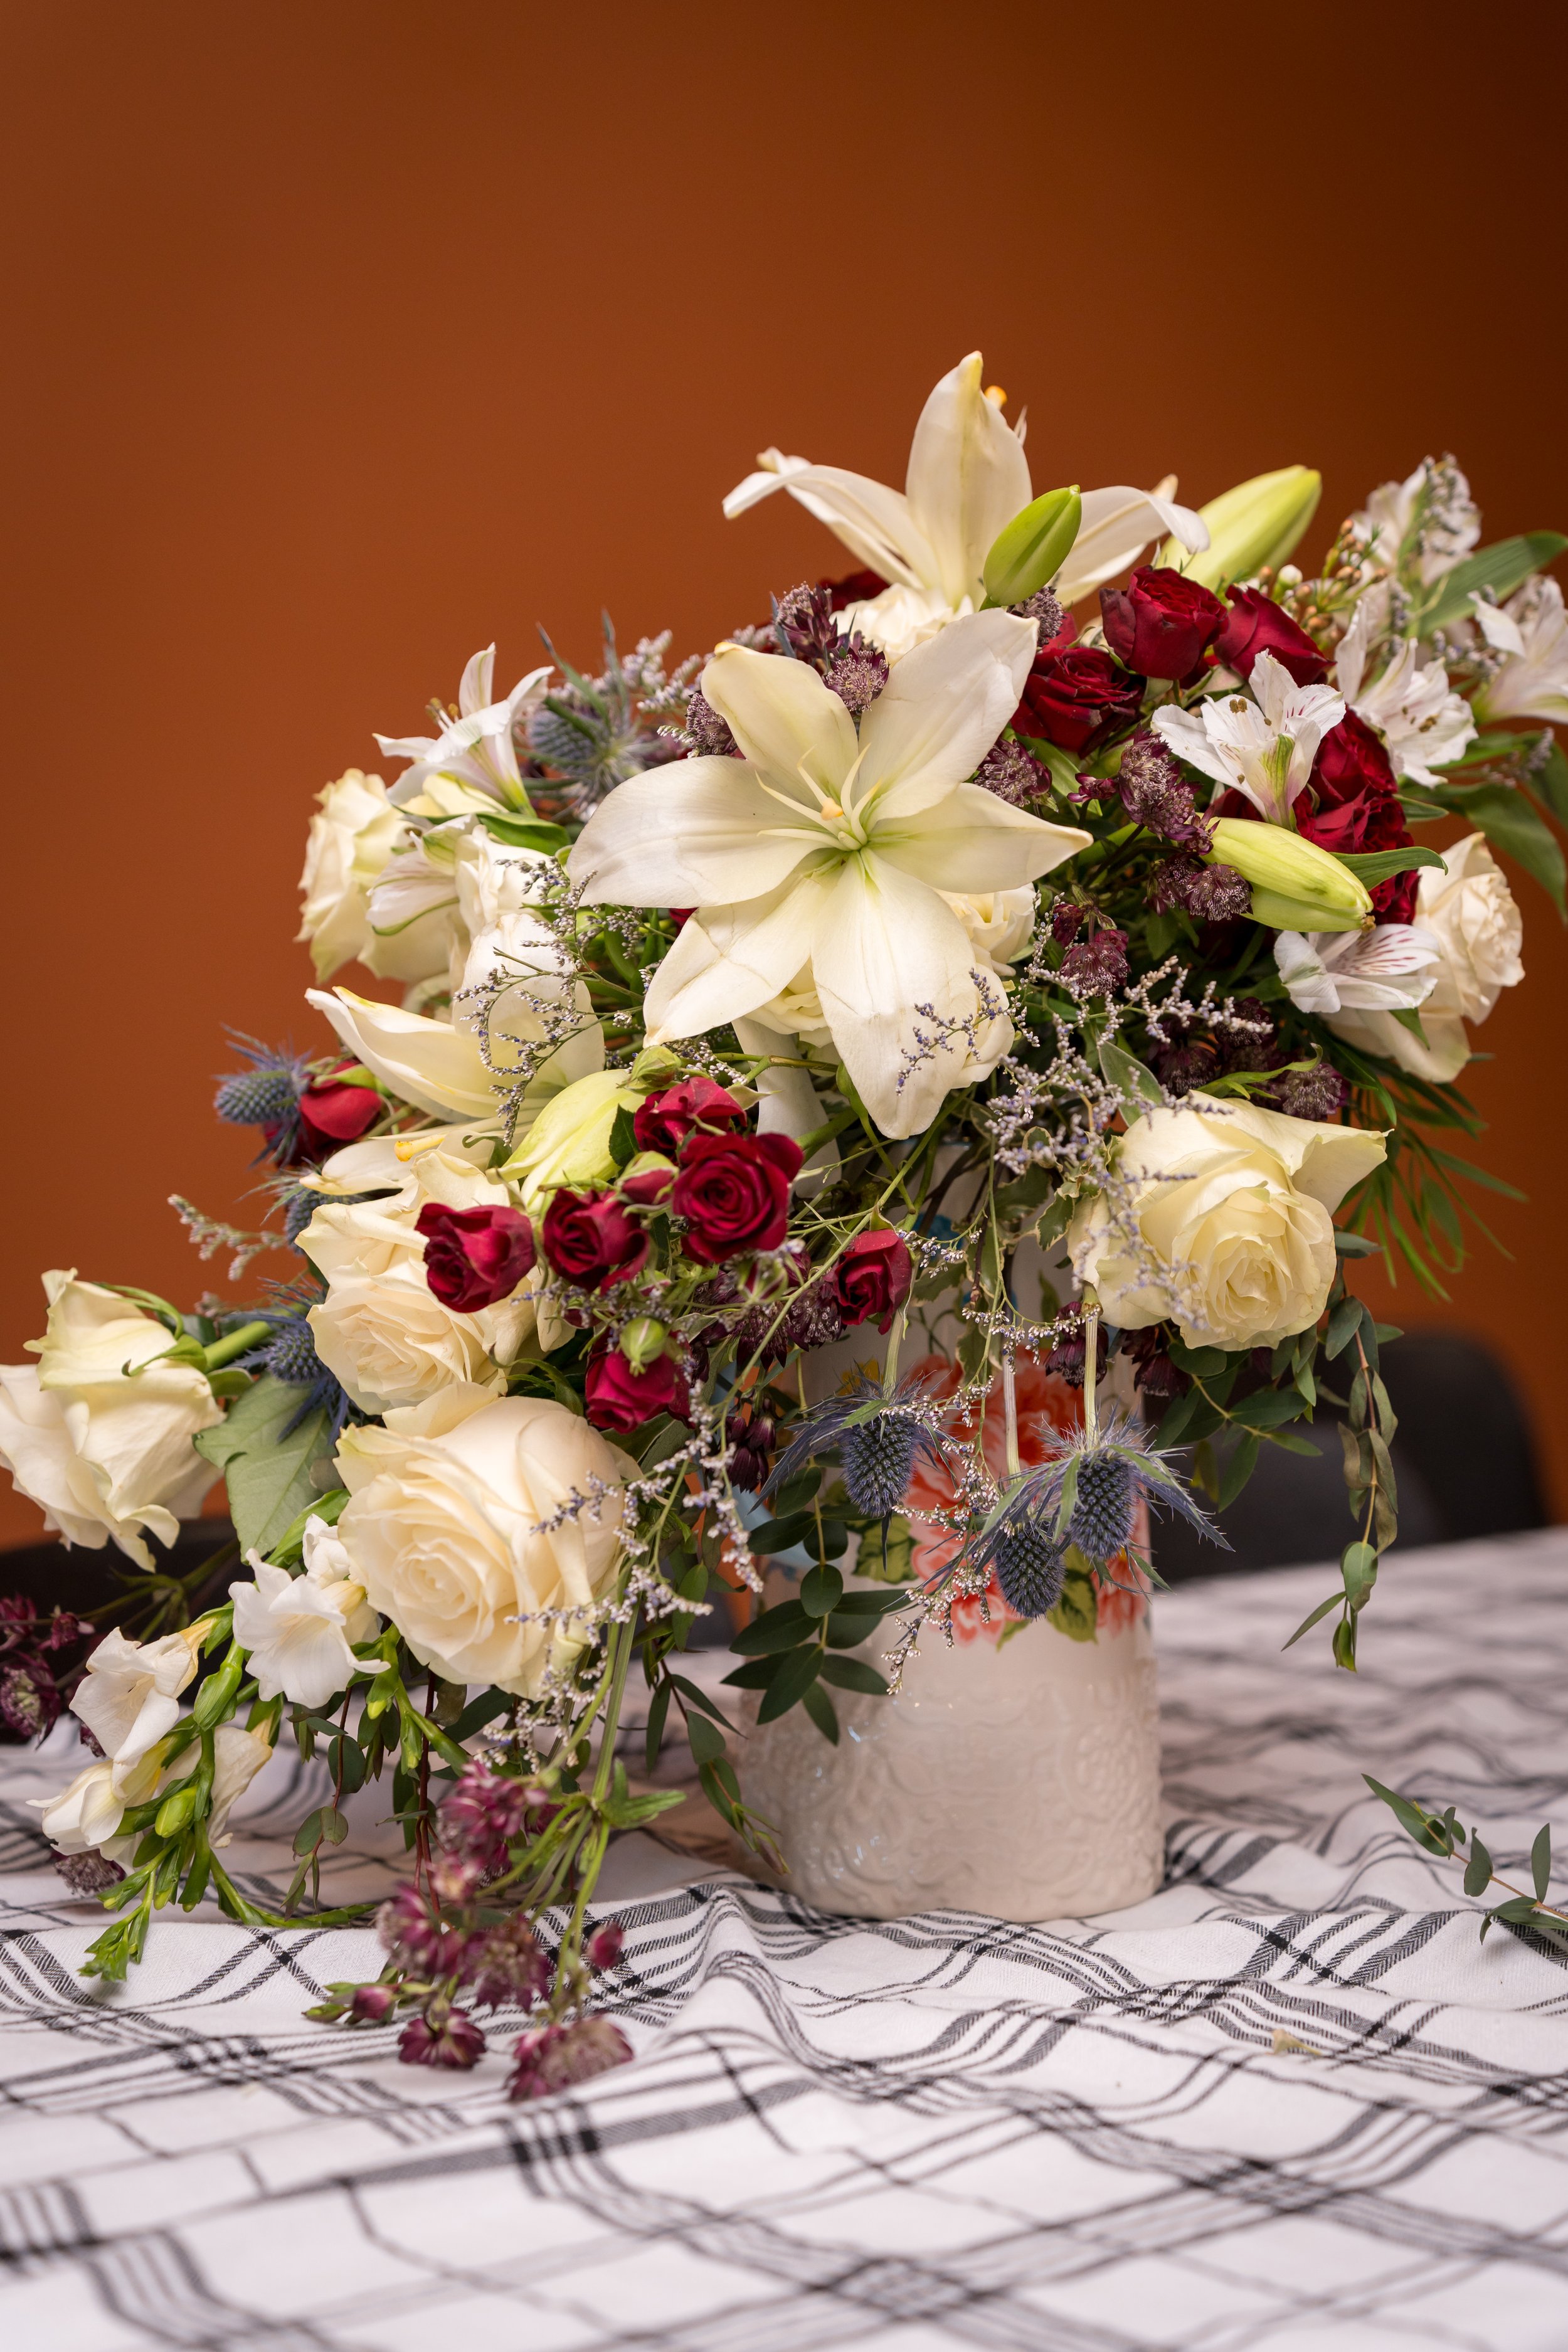 Types of Flowers Used in Floral Arrangements - Focals, Fillers, Line Flowers,  and Greenery - Cascade Floral Wholesale